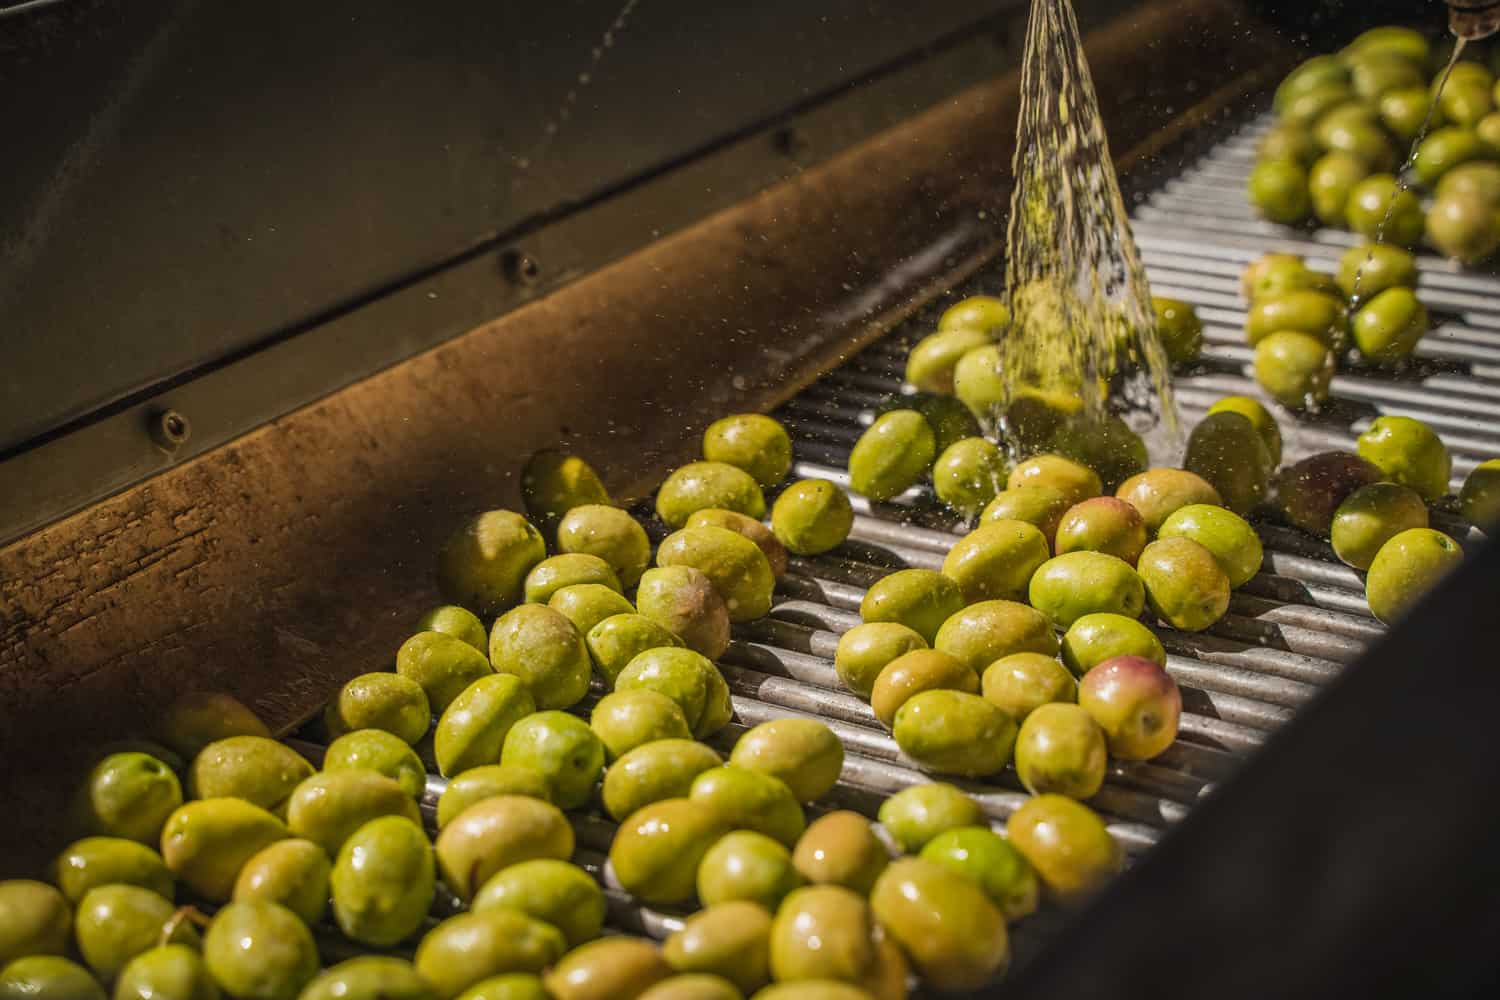 Olives get washed in production line for being olive oil